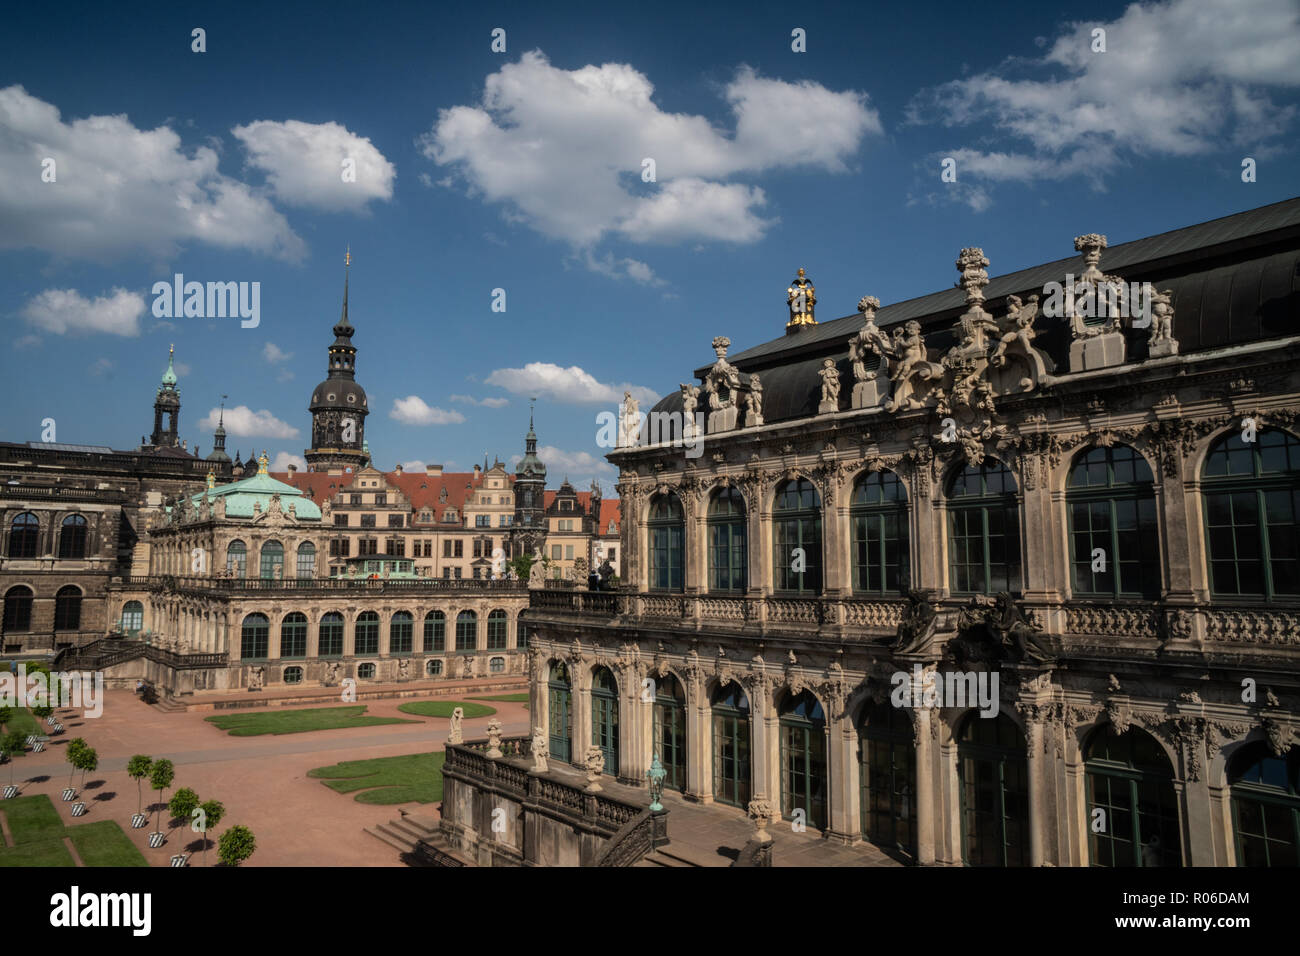 Internal courtyard of Zwinger Palace, completely rebuilt after World War 2 bombings, Dresden, Saxony, Germany, Europe Stock Photo